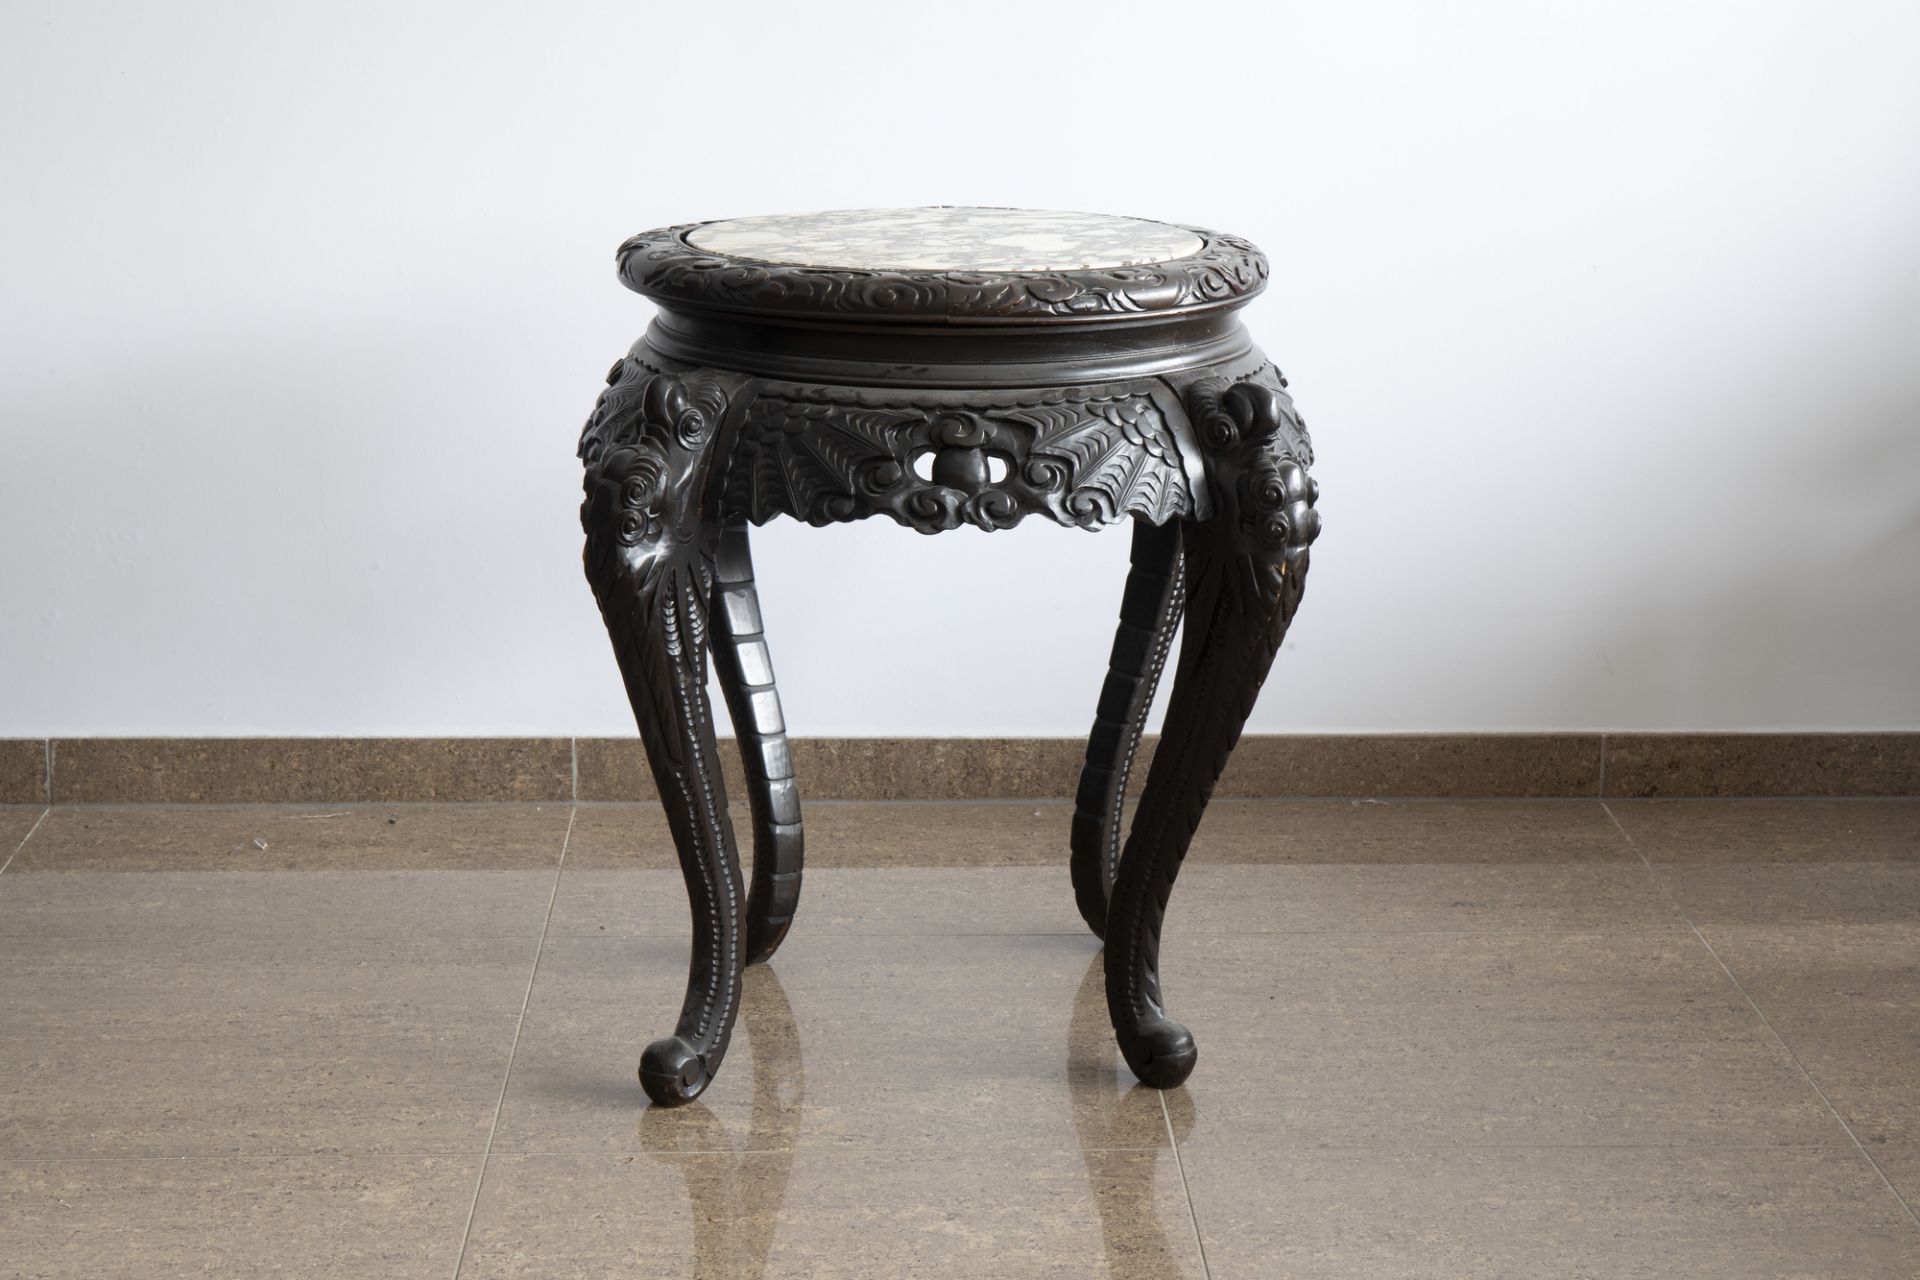 A Chinese or Japanese wooden table with marble top and dragon shaped legs, 20th C. - Image 4 of 7